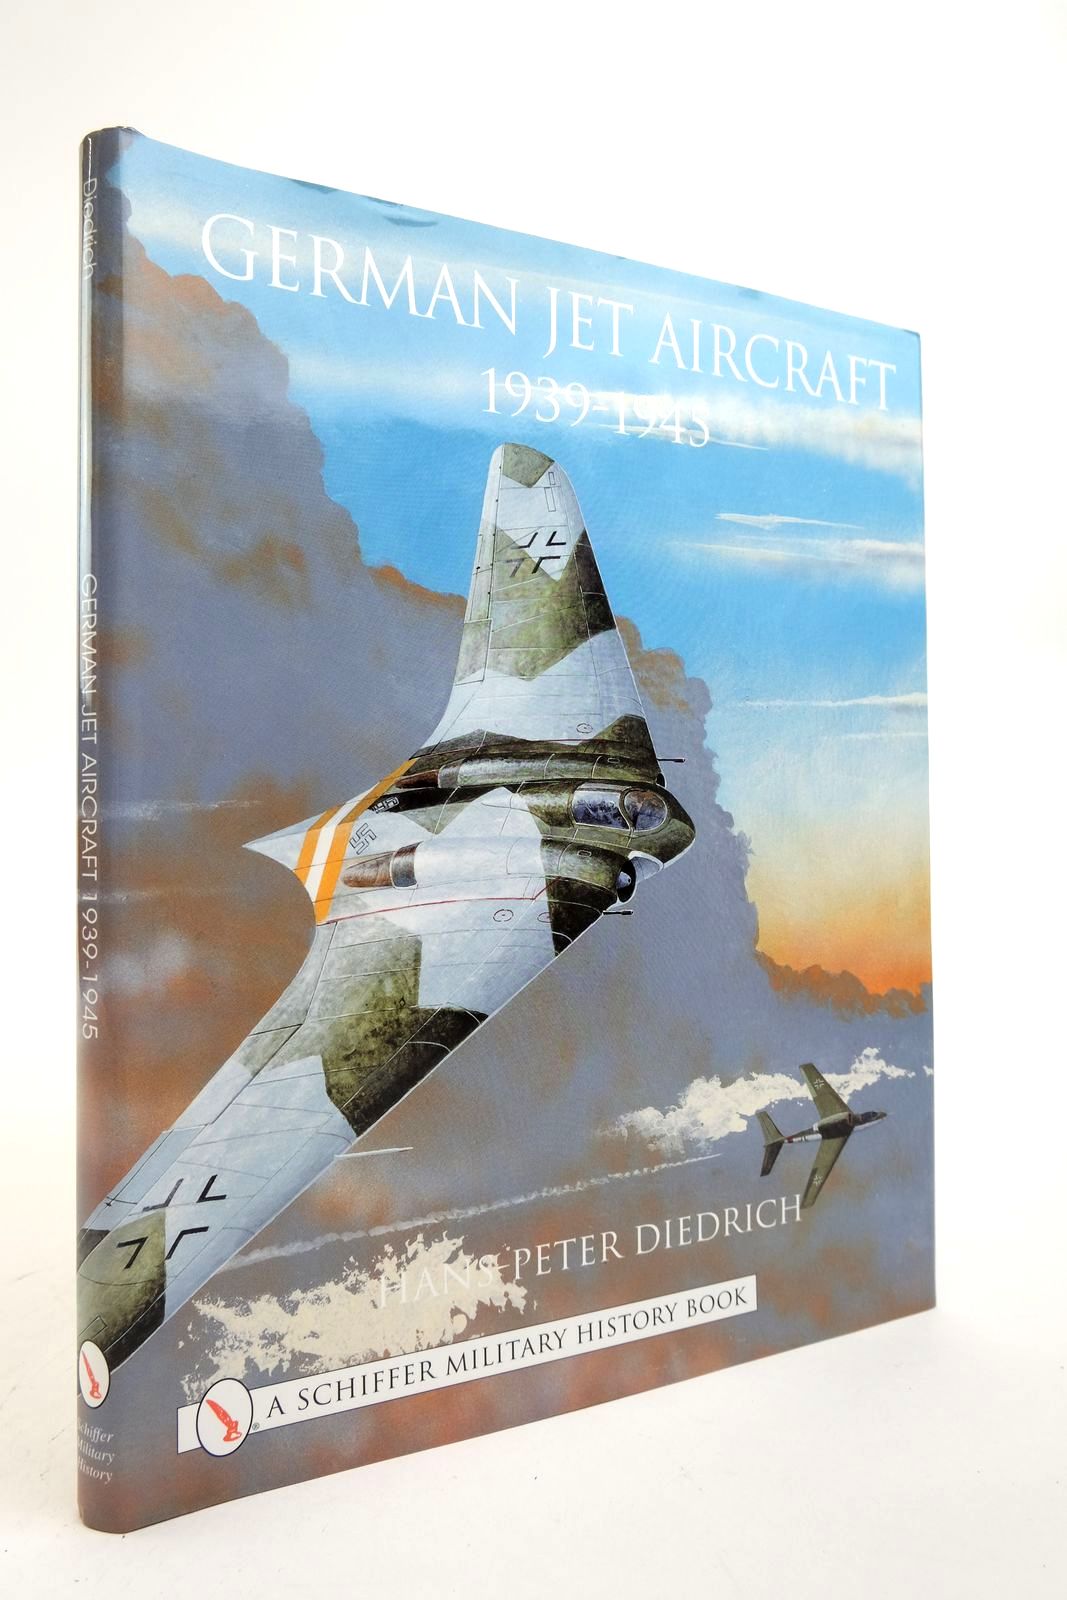 Photo of GERMAN JET AIRCRAFT 1939-1945 written by Diedrich, Hans-Peter published by Schiffer Military History (STOCK CODE: 2139312)  for sale by Stella & Rose's Books